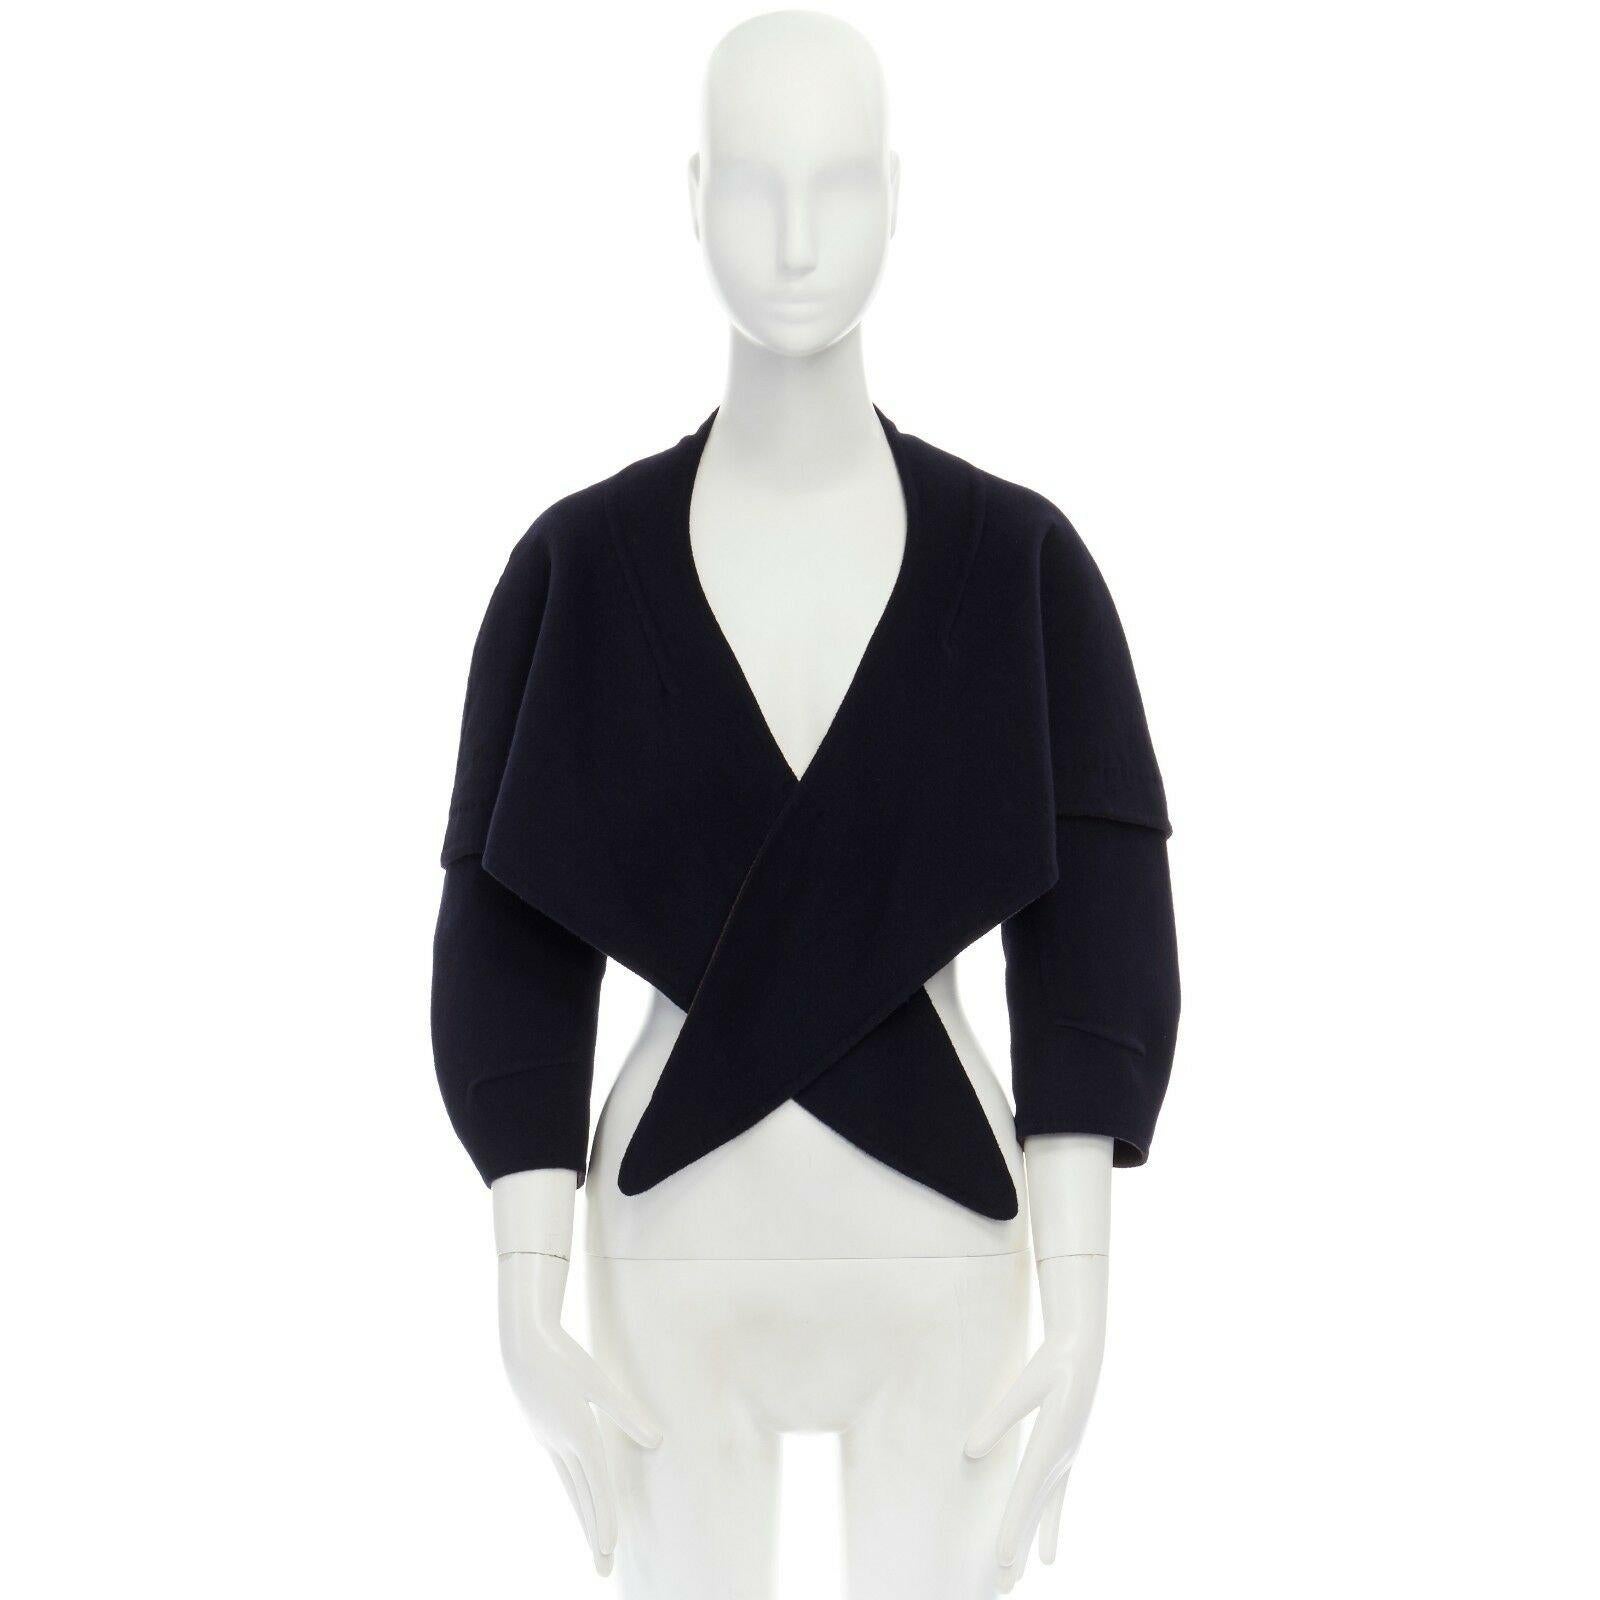 LOUIS VUITTON navy blue double faced wool blend tie front capelet shawl FR36 S 
Reference: TGAS/A02527 
Brand: Louis Vuitton 
Material: Wool 
Color: Blue 
Pattern: Solid 
Extra Detail: Wool, angora, cashgora. Navy blue. Double faced. Brown lining.